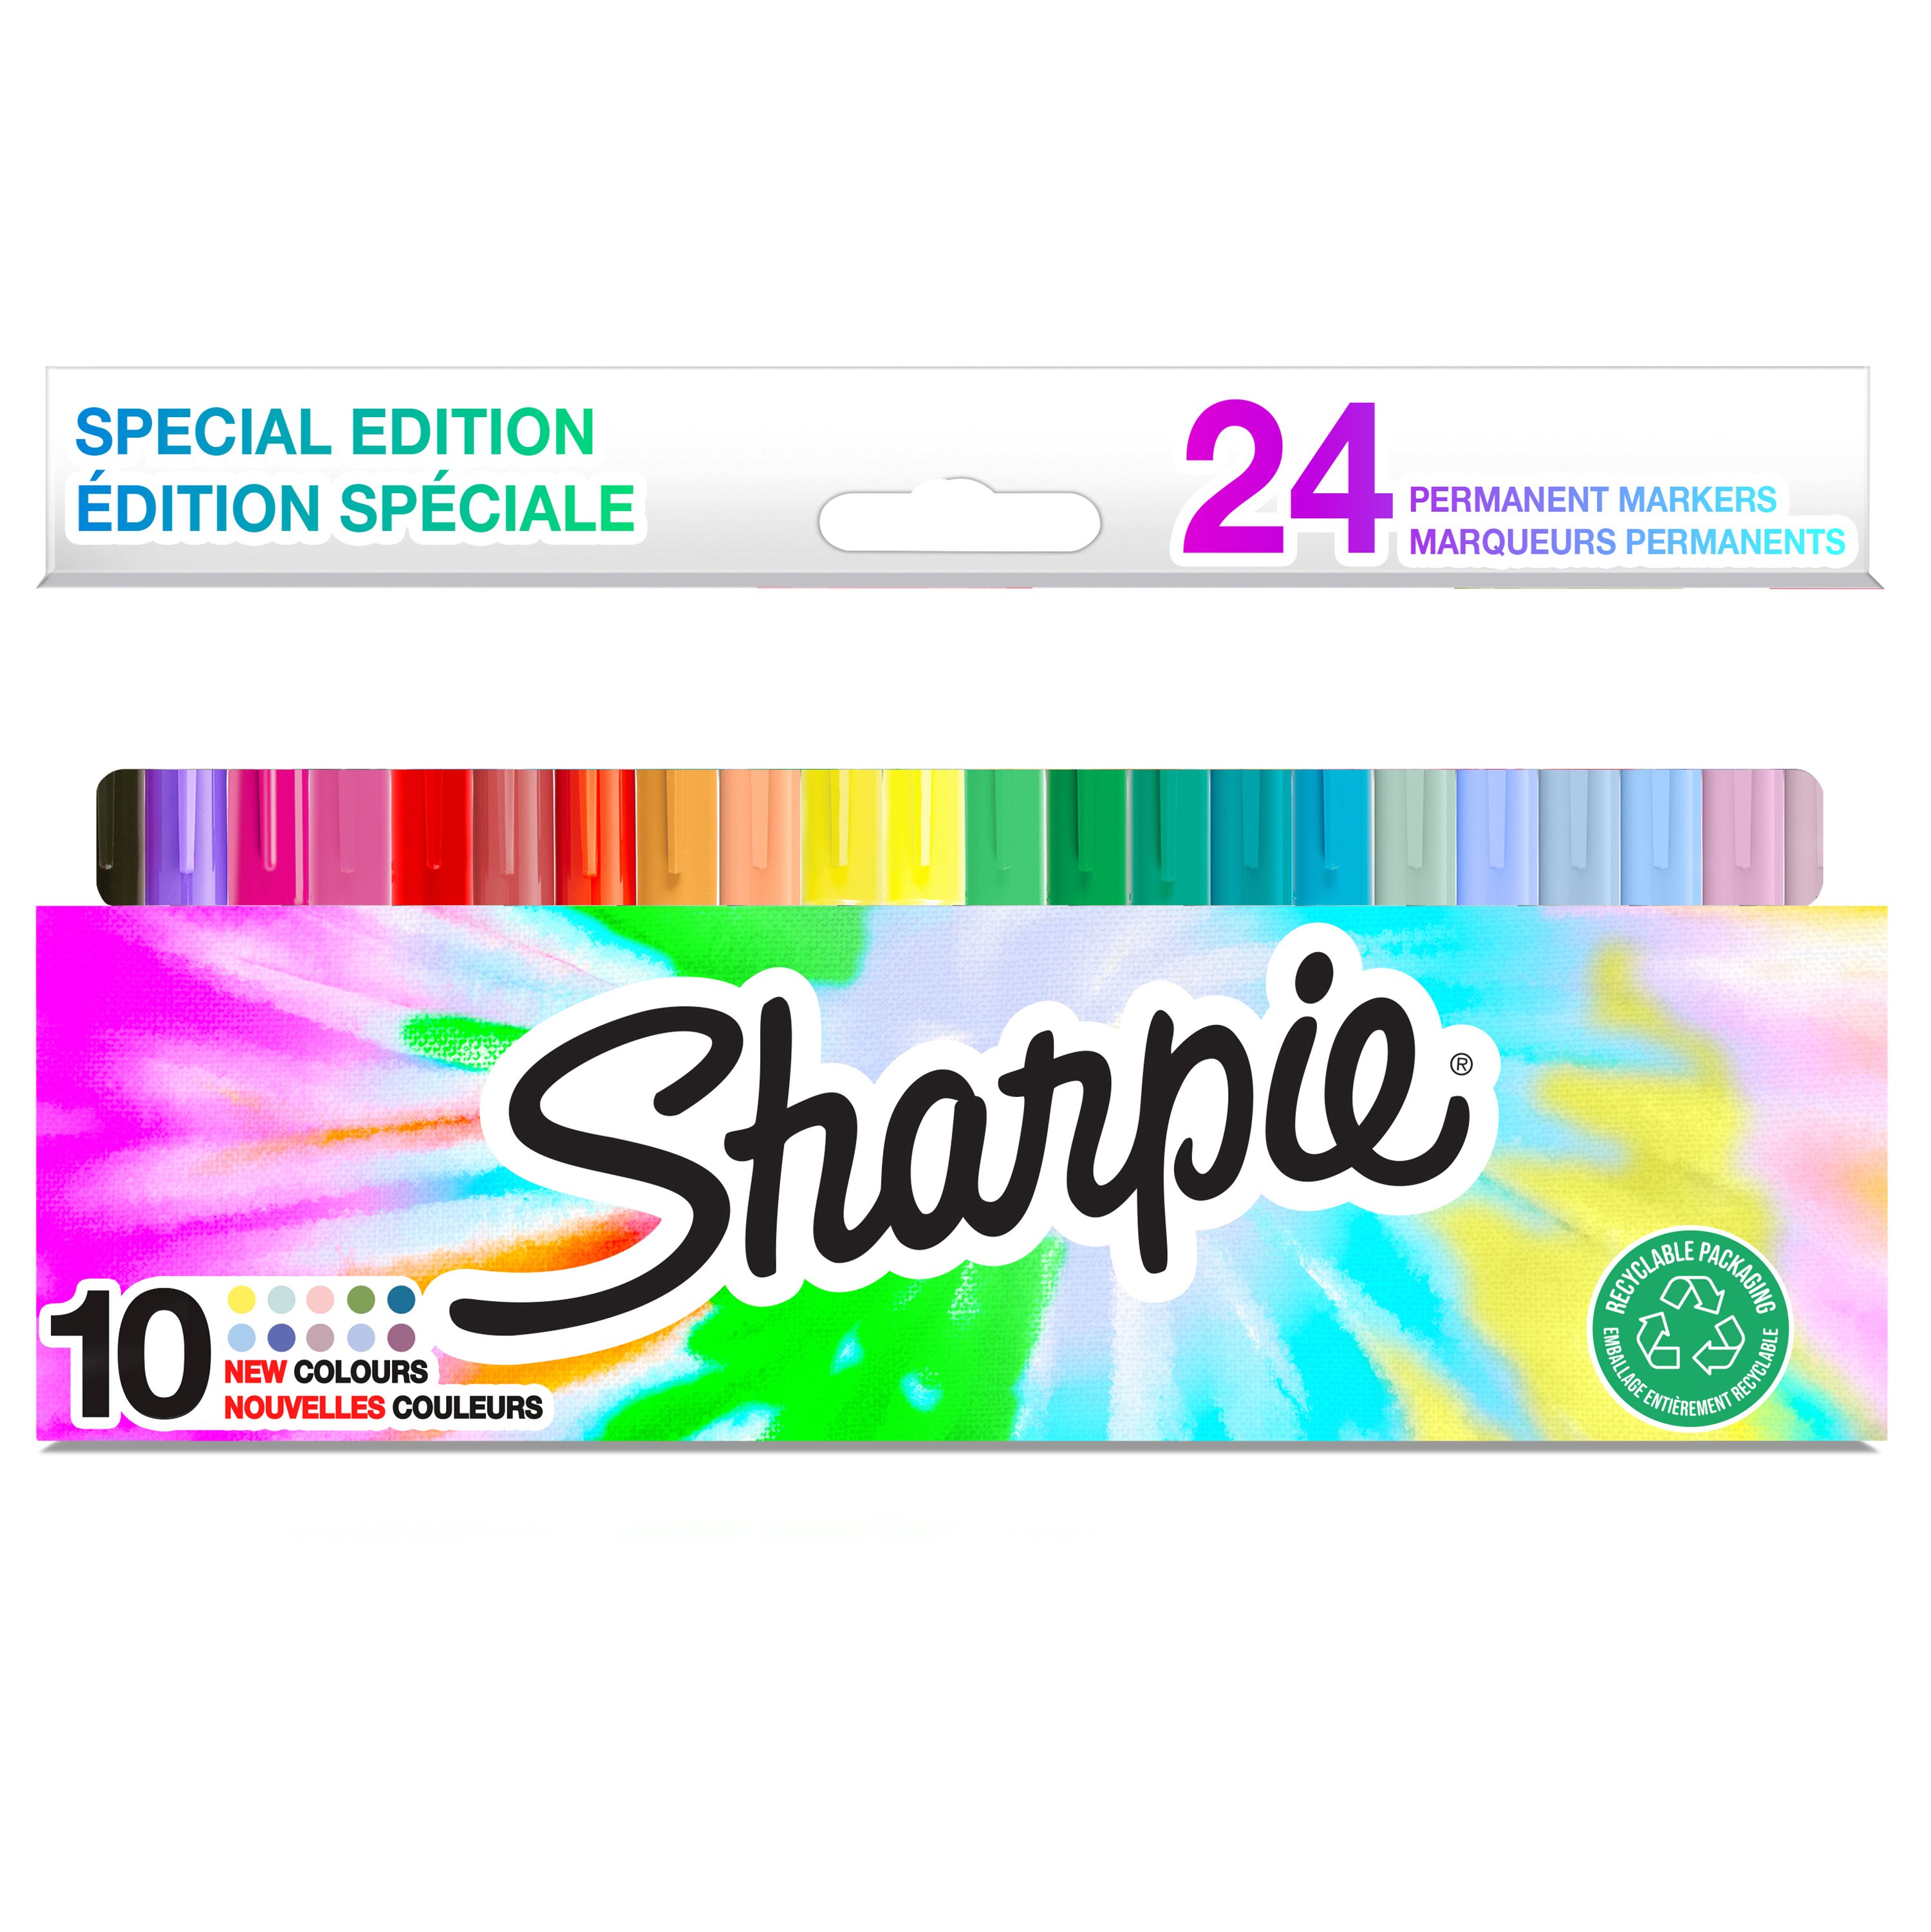 Sharpie - Permanent Marker Fine Special Edition 24-Blister (2180834)